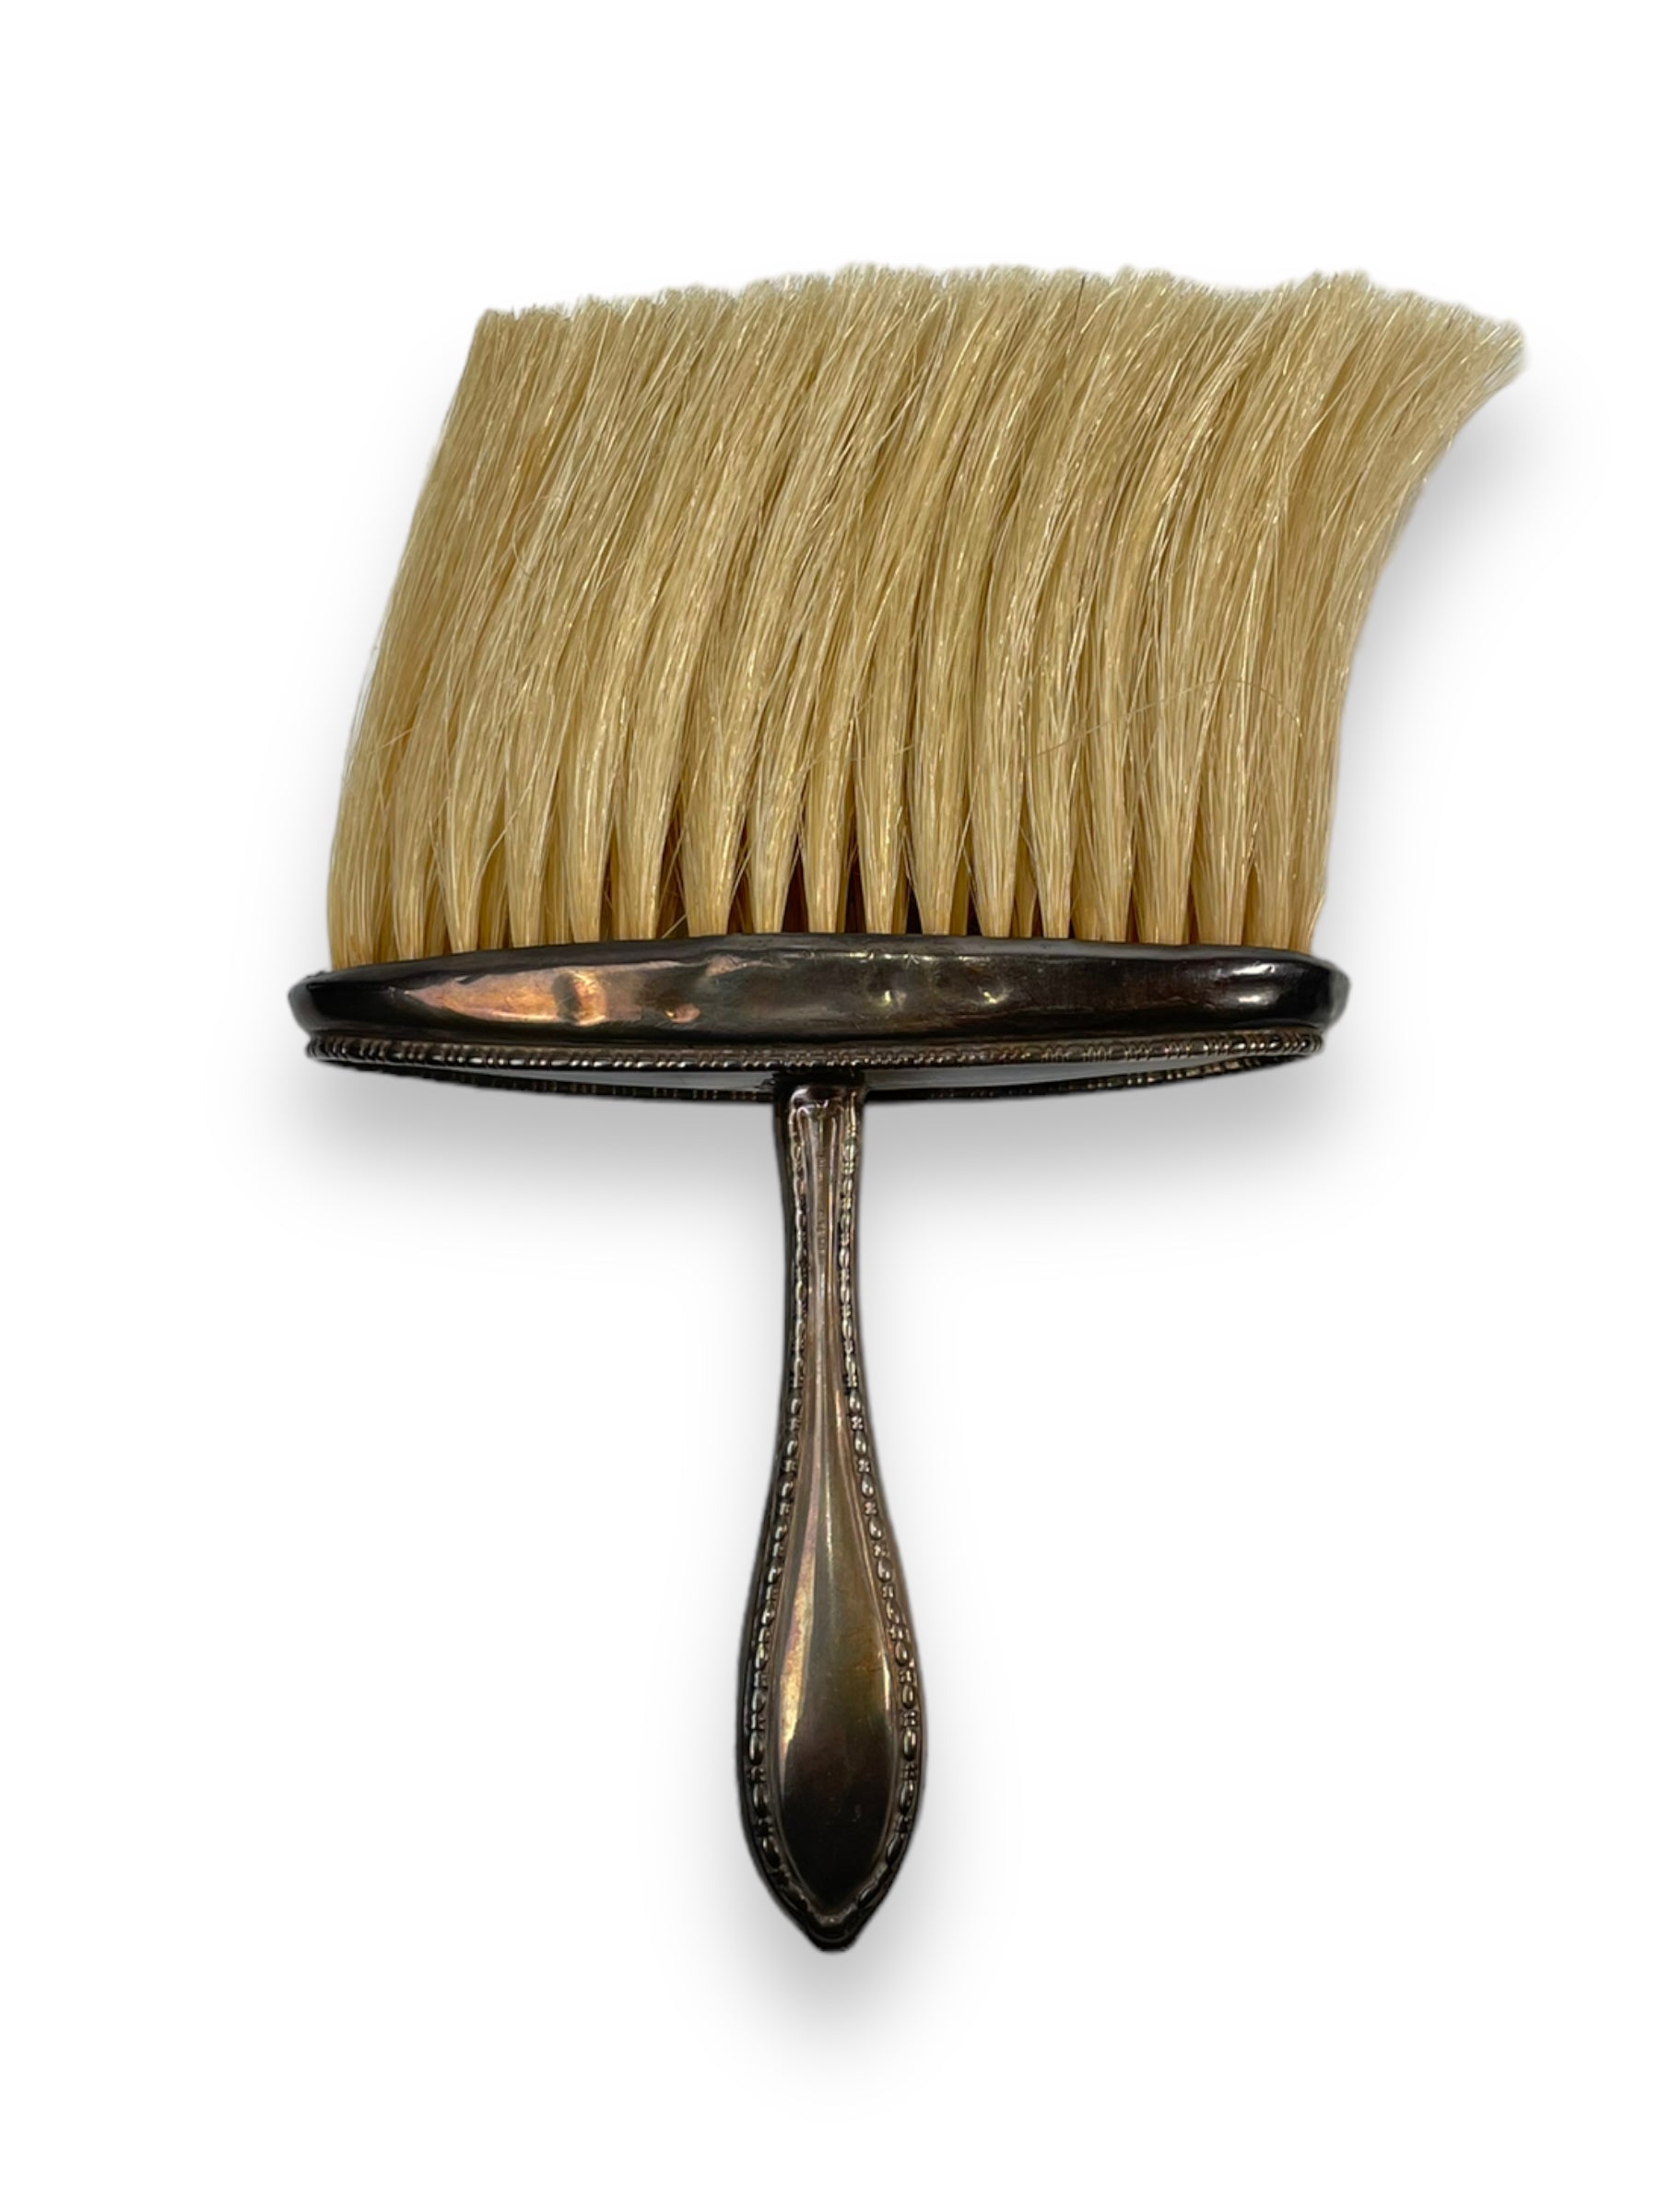 Antique Hat Brush with Sterling Silver Handle